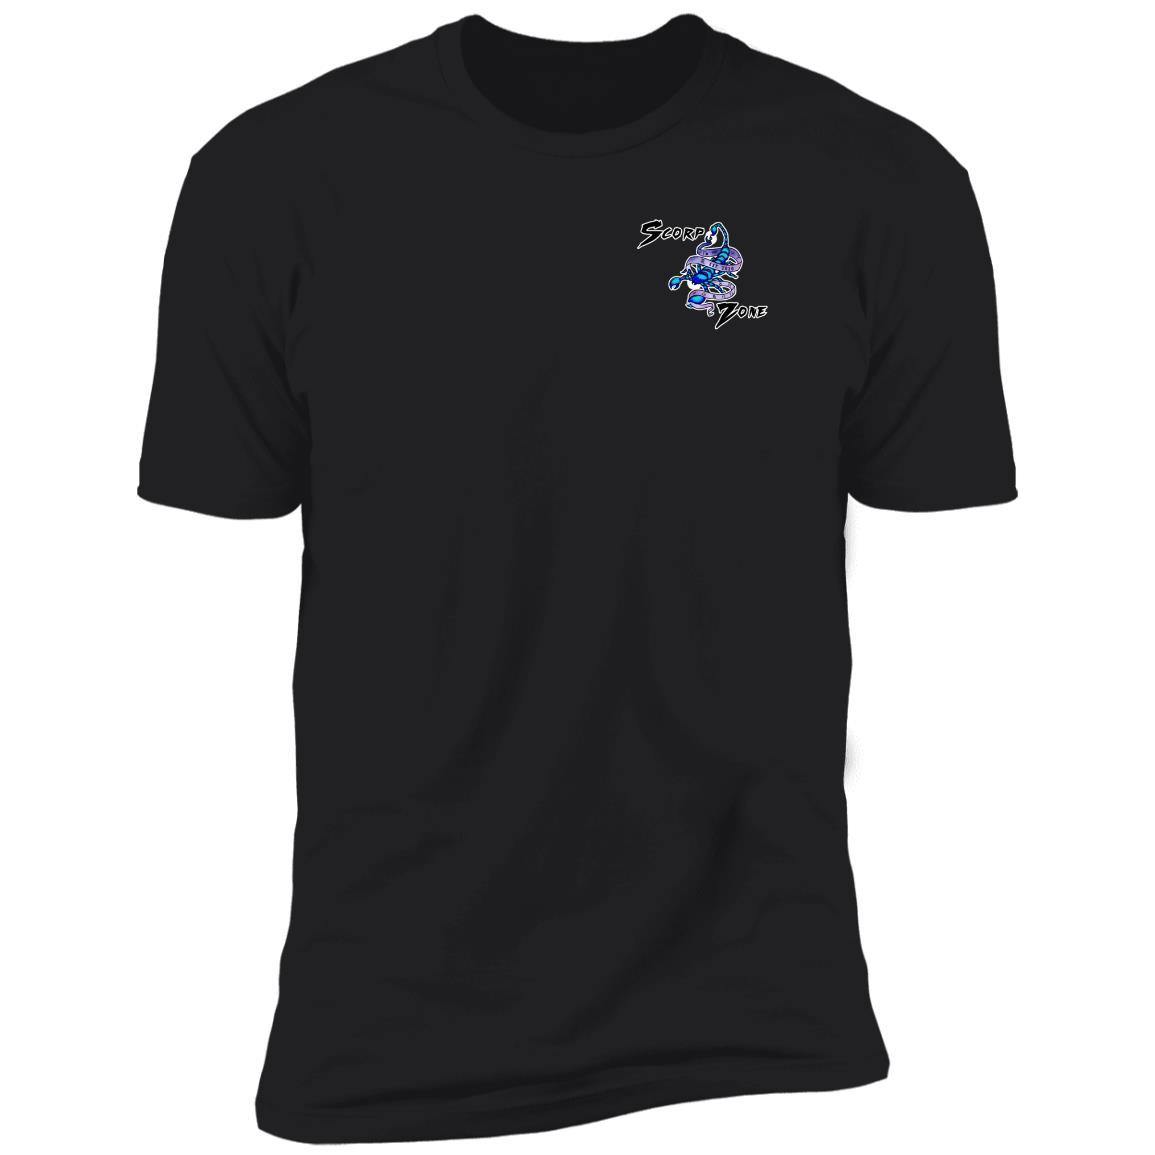 Pisces Design On Back and Small Scorp Zone Logo On Front - Premium Short Sleeve T-Shirt - ScorpZone